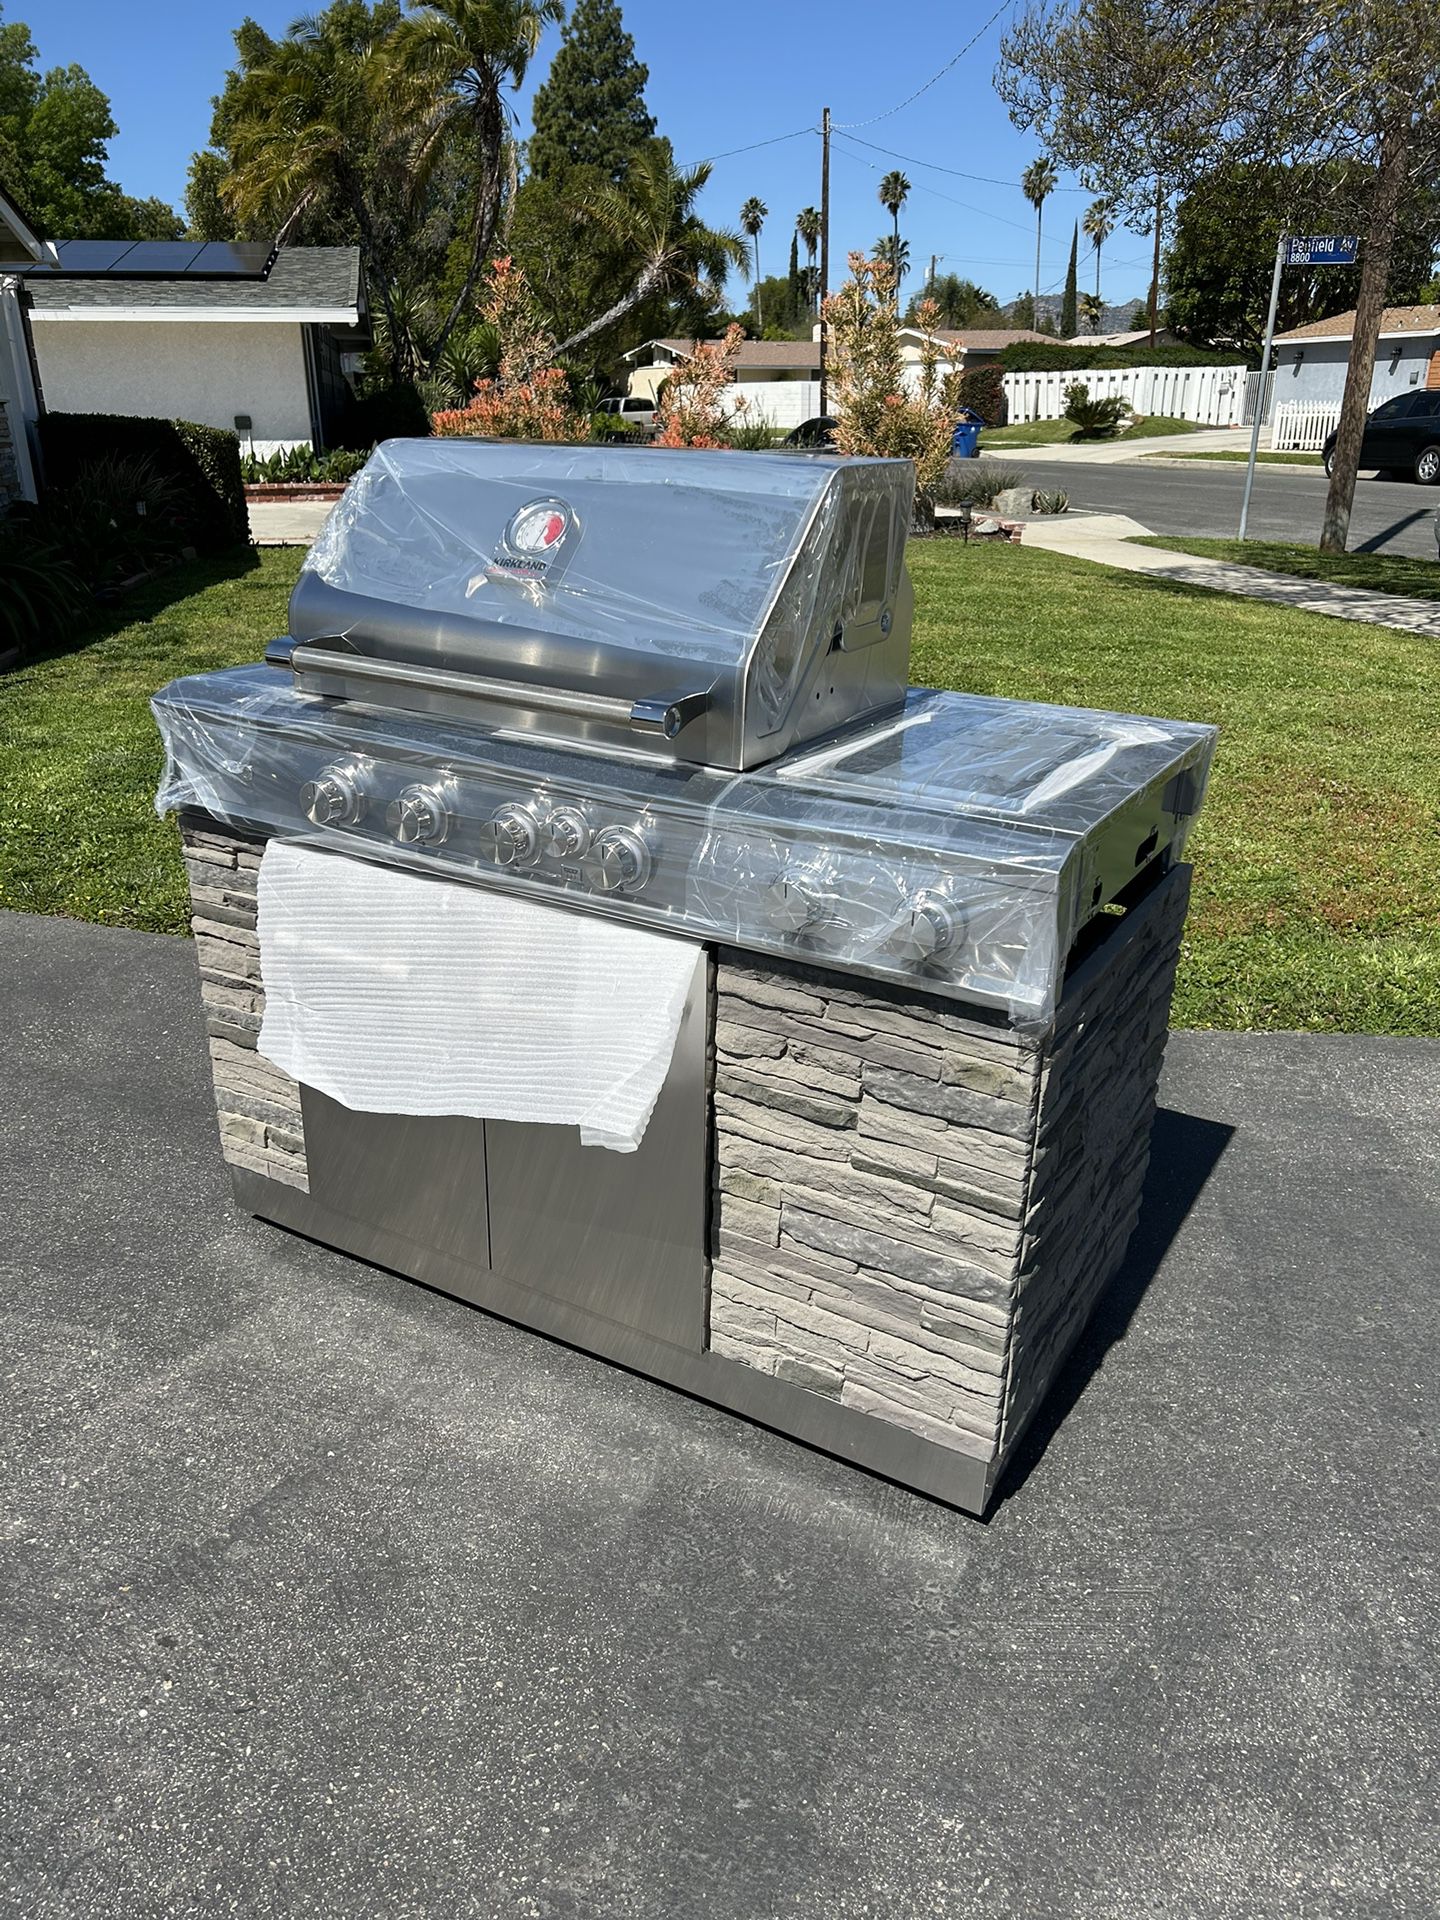 Brand New Kirkland 7 Burner Barbecue  Gas Grill Island  Never Been Used Yet . Completely Assembled Ready To Go. $1600Firm 